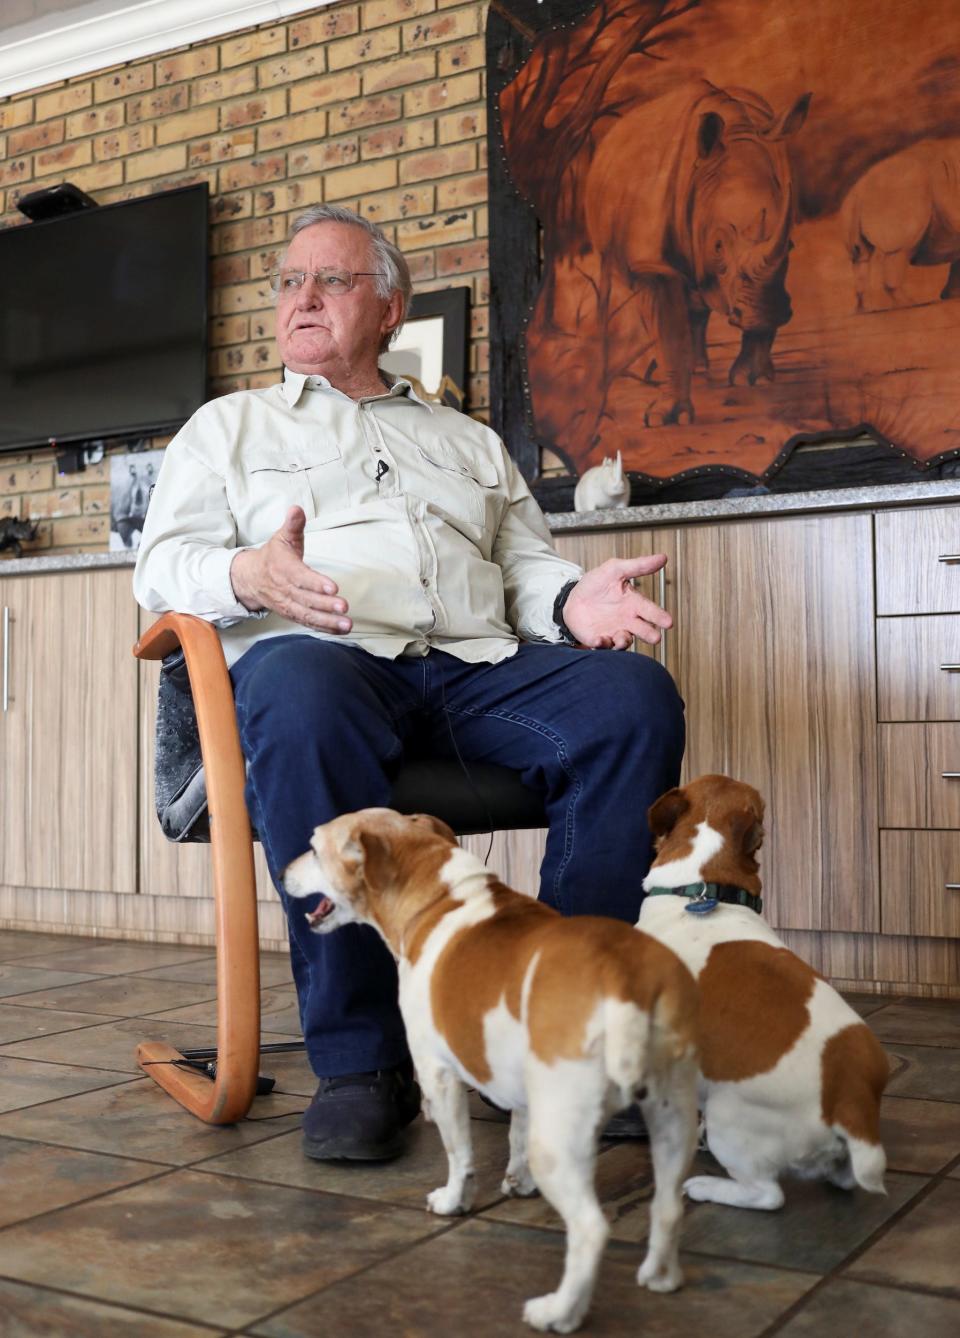 John Hume, private rhino breeder, looks on while sitting in a chair with two dogs at his feet.